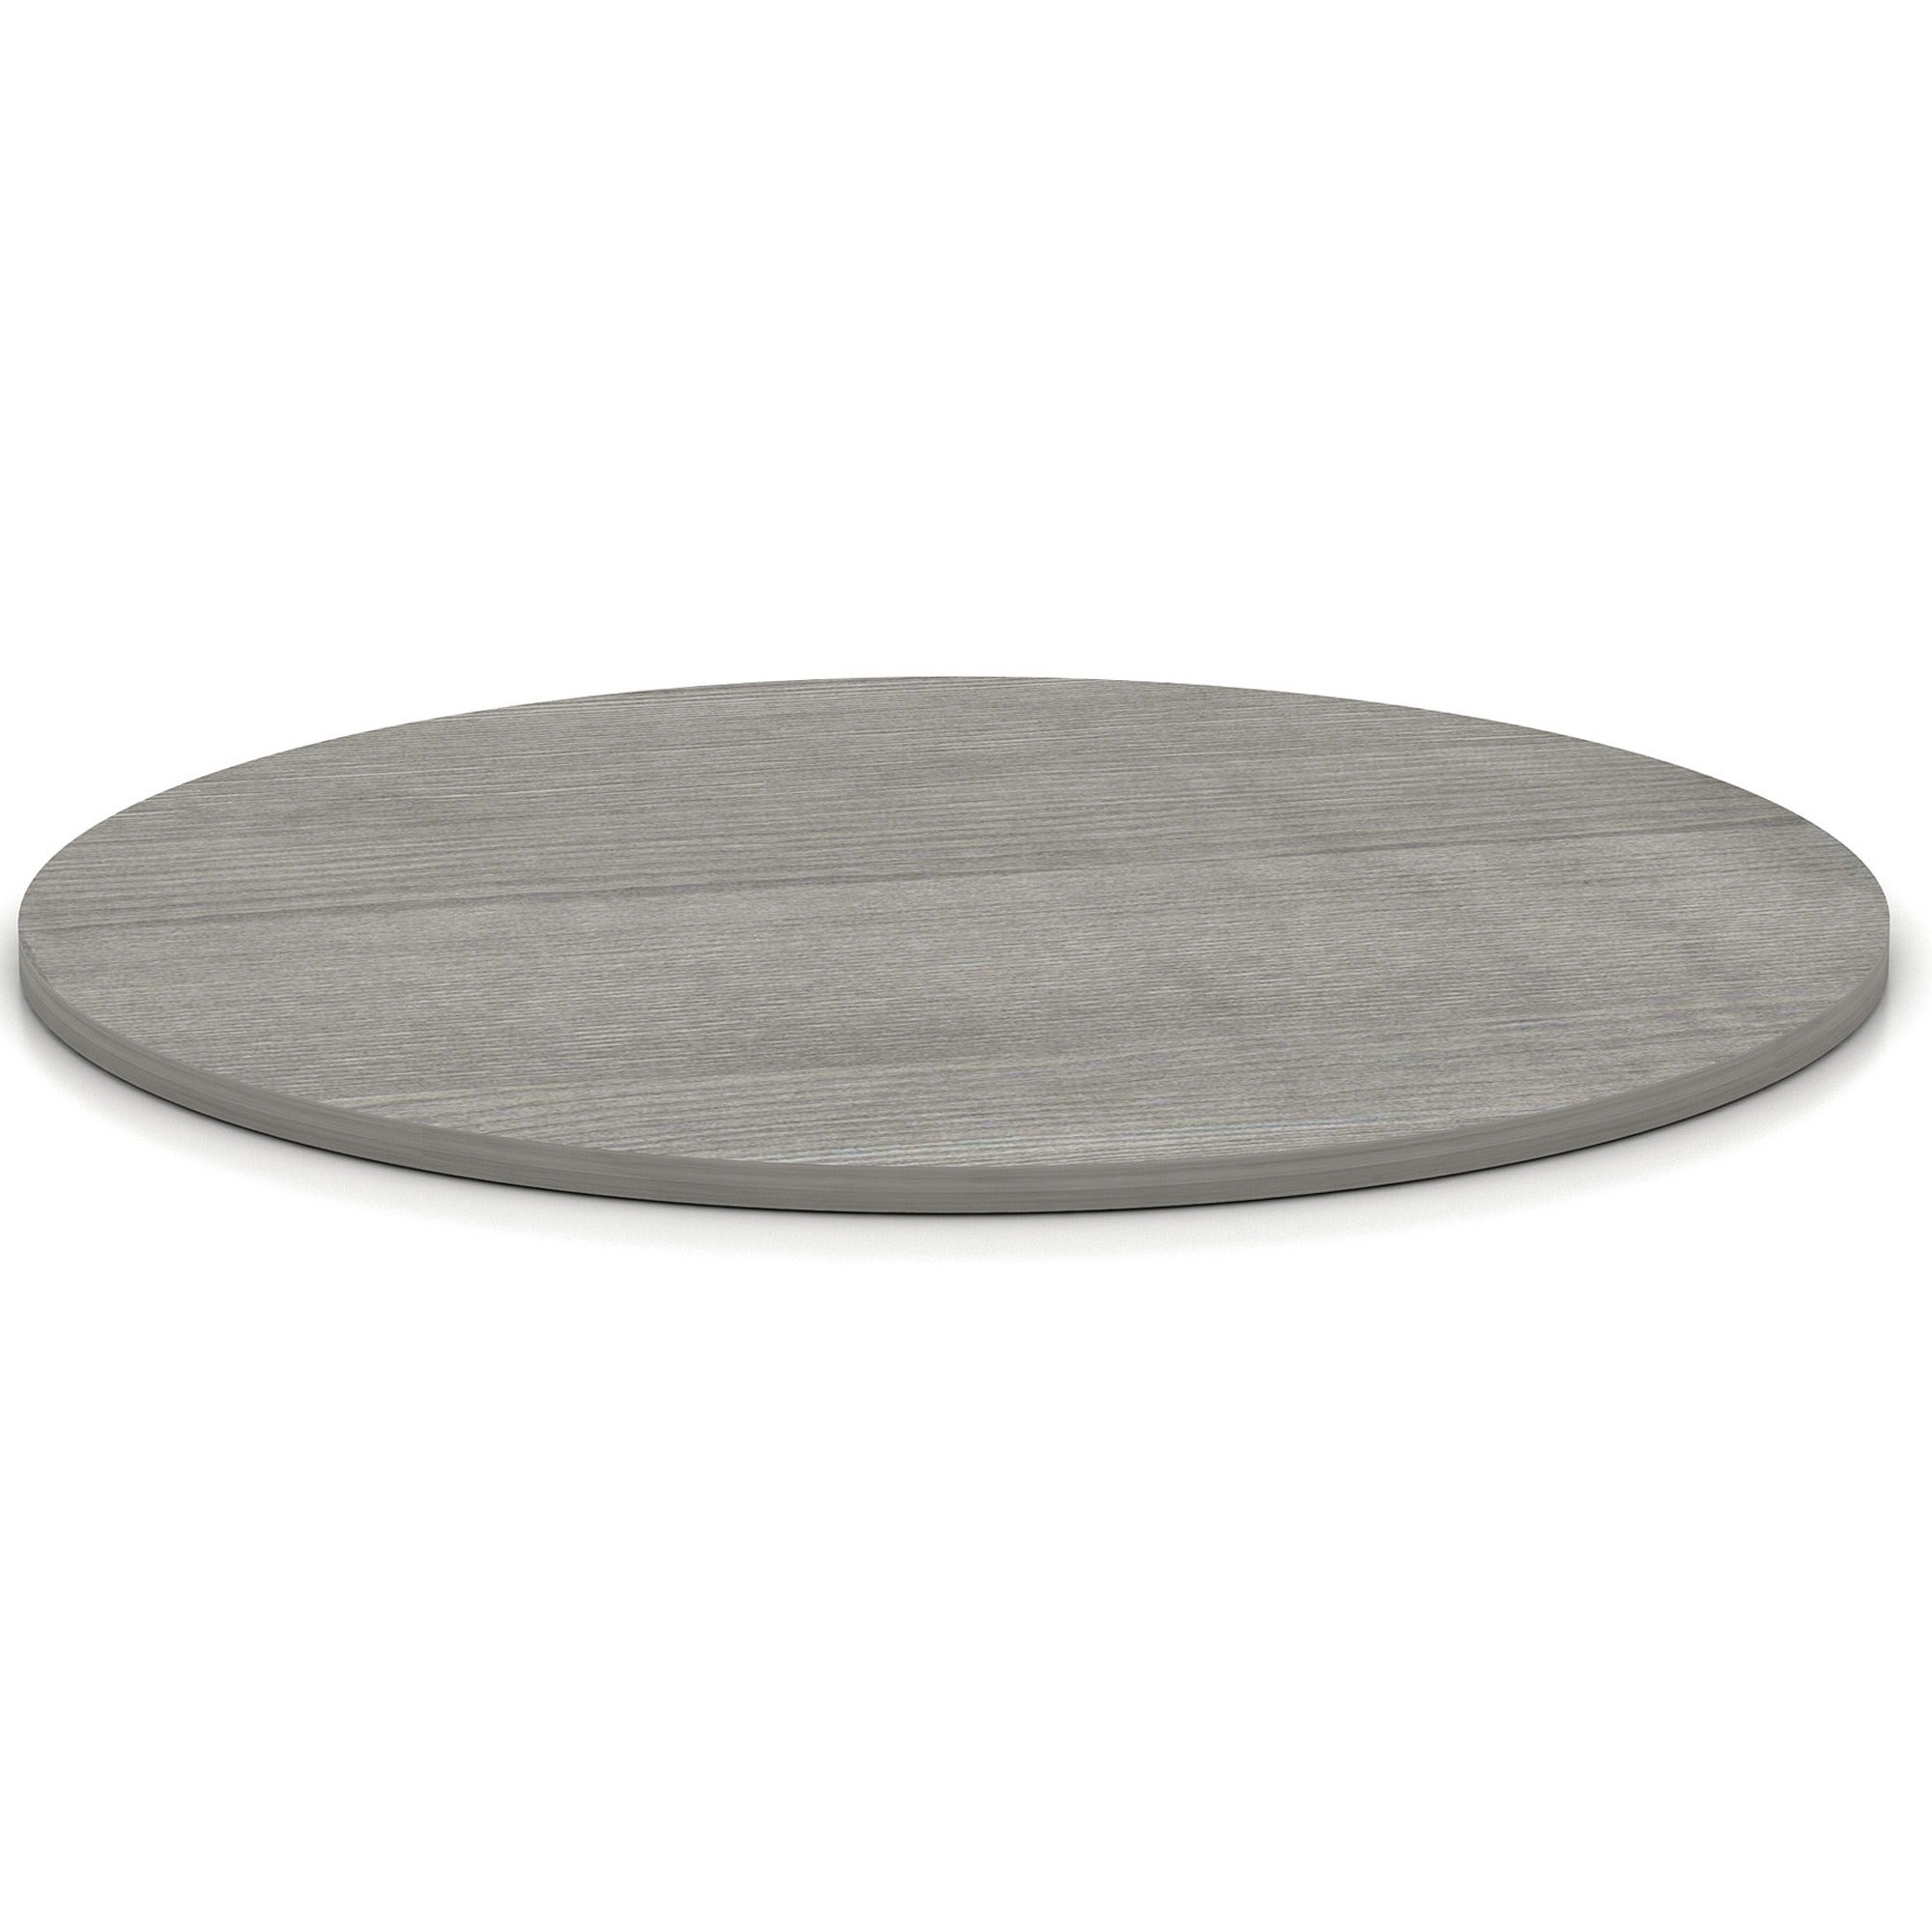 lorell-essentials-conference-tabletop-for-table-topweathered-charcoal-laminate-round-top-contemporary-style-x-1-table-top-thickness-x-42-table-top-diameter-assembly-required-1-each_llr69587 - 1